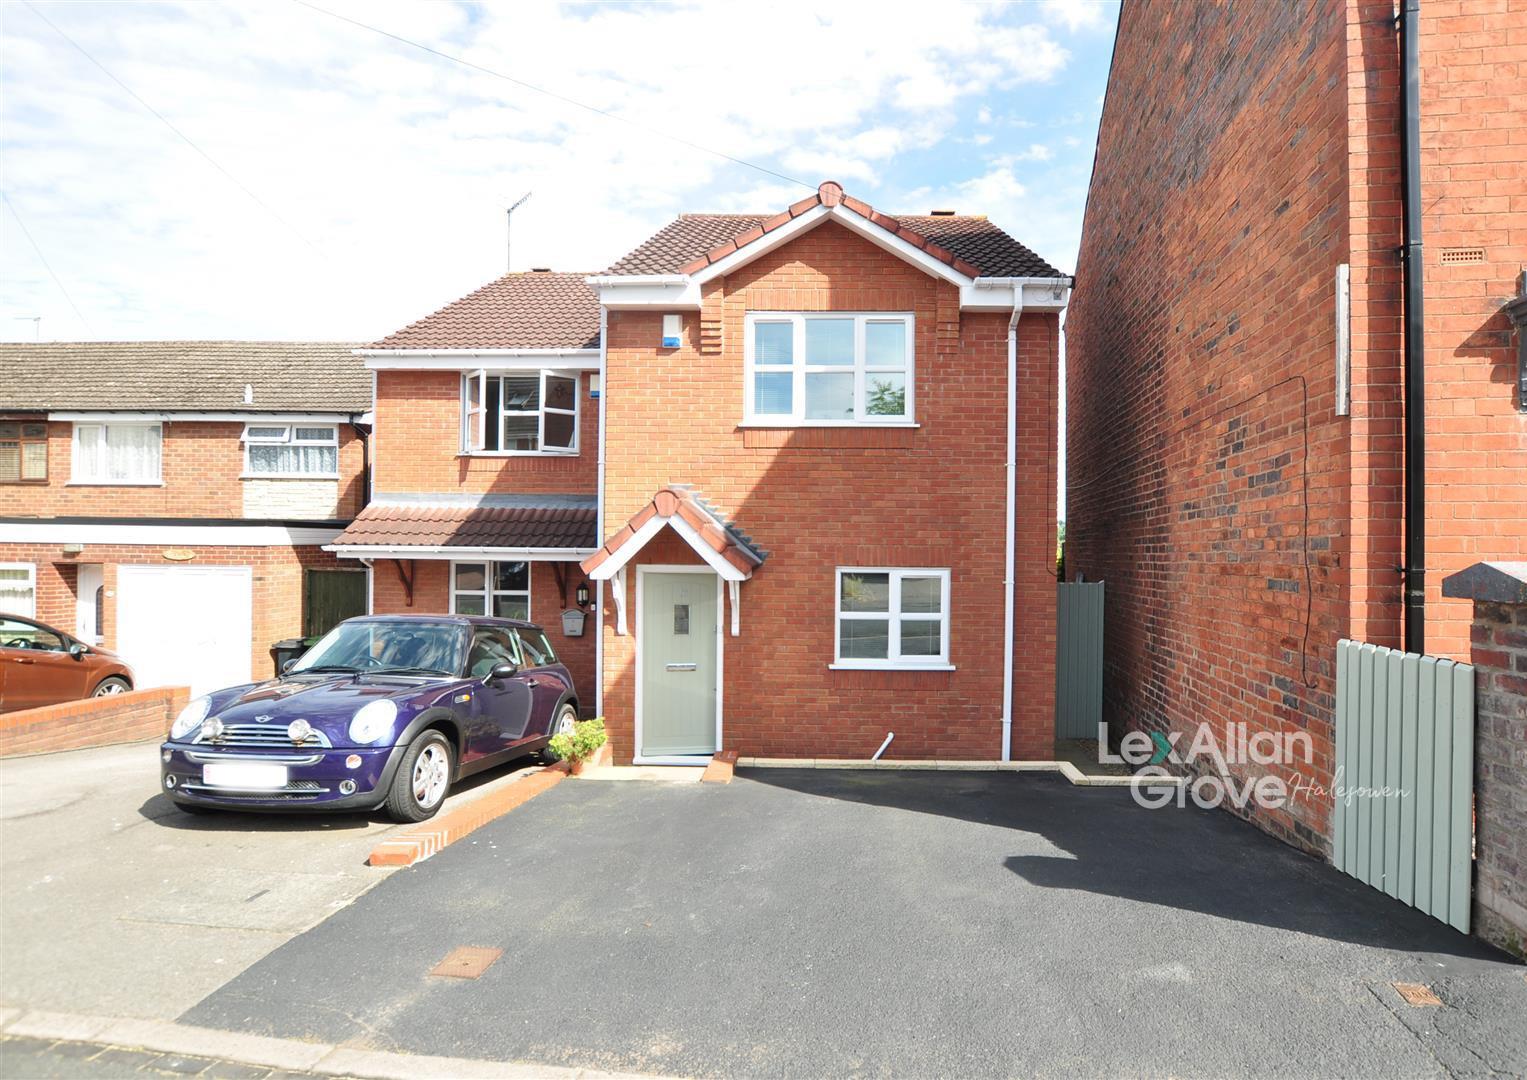 2 bed  for sale in East Street, Brierley Hill, DY5 